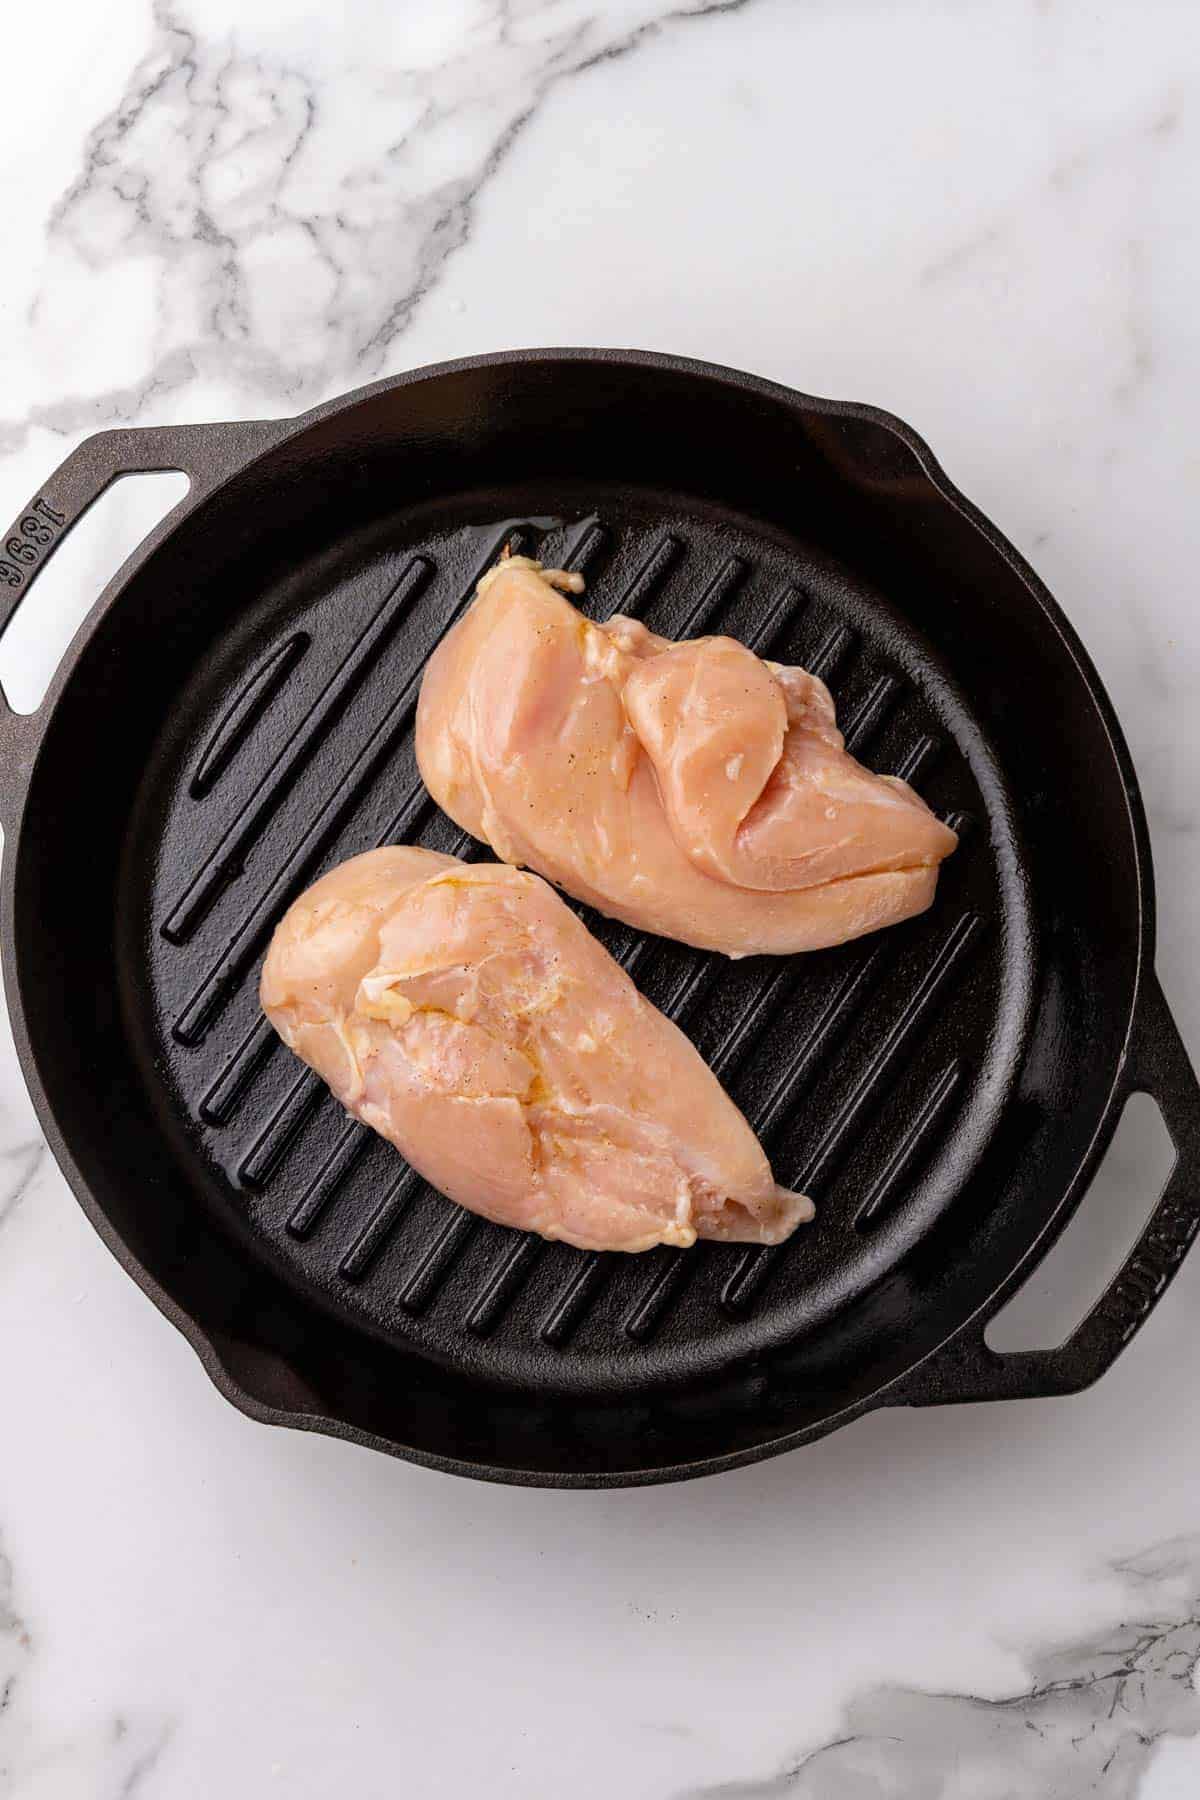 Chicken breasts placed on a black grill pan on a white marble background, as seen from above